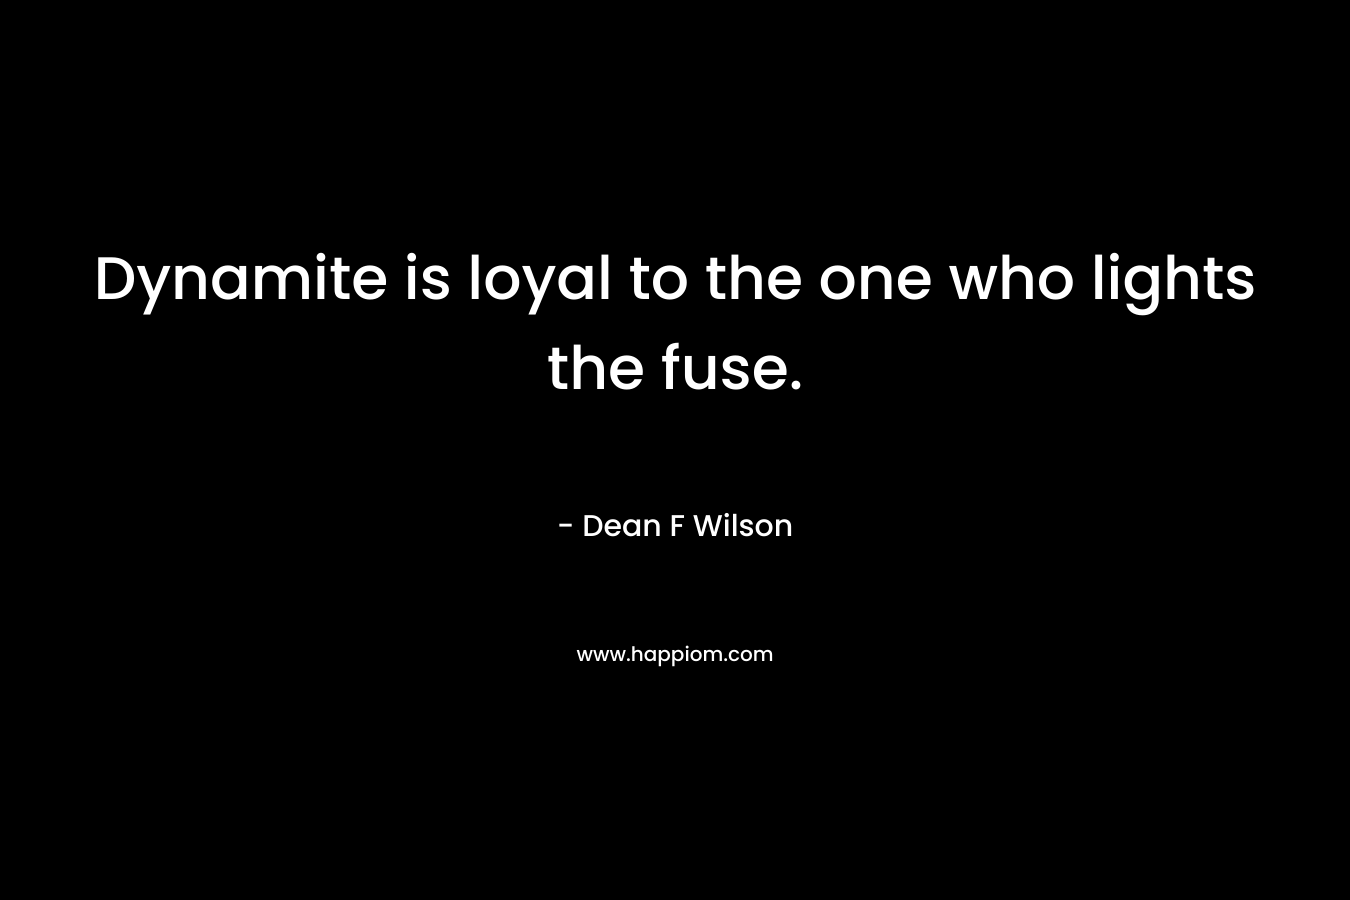 Dynamite is loyal to the one who lights the fuse. – Dean F Wilson